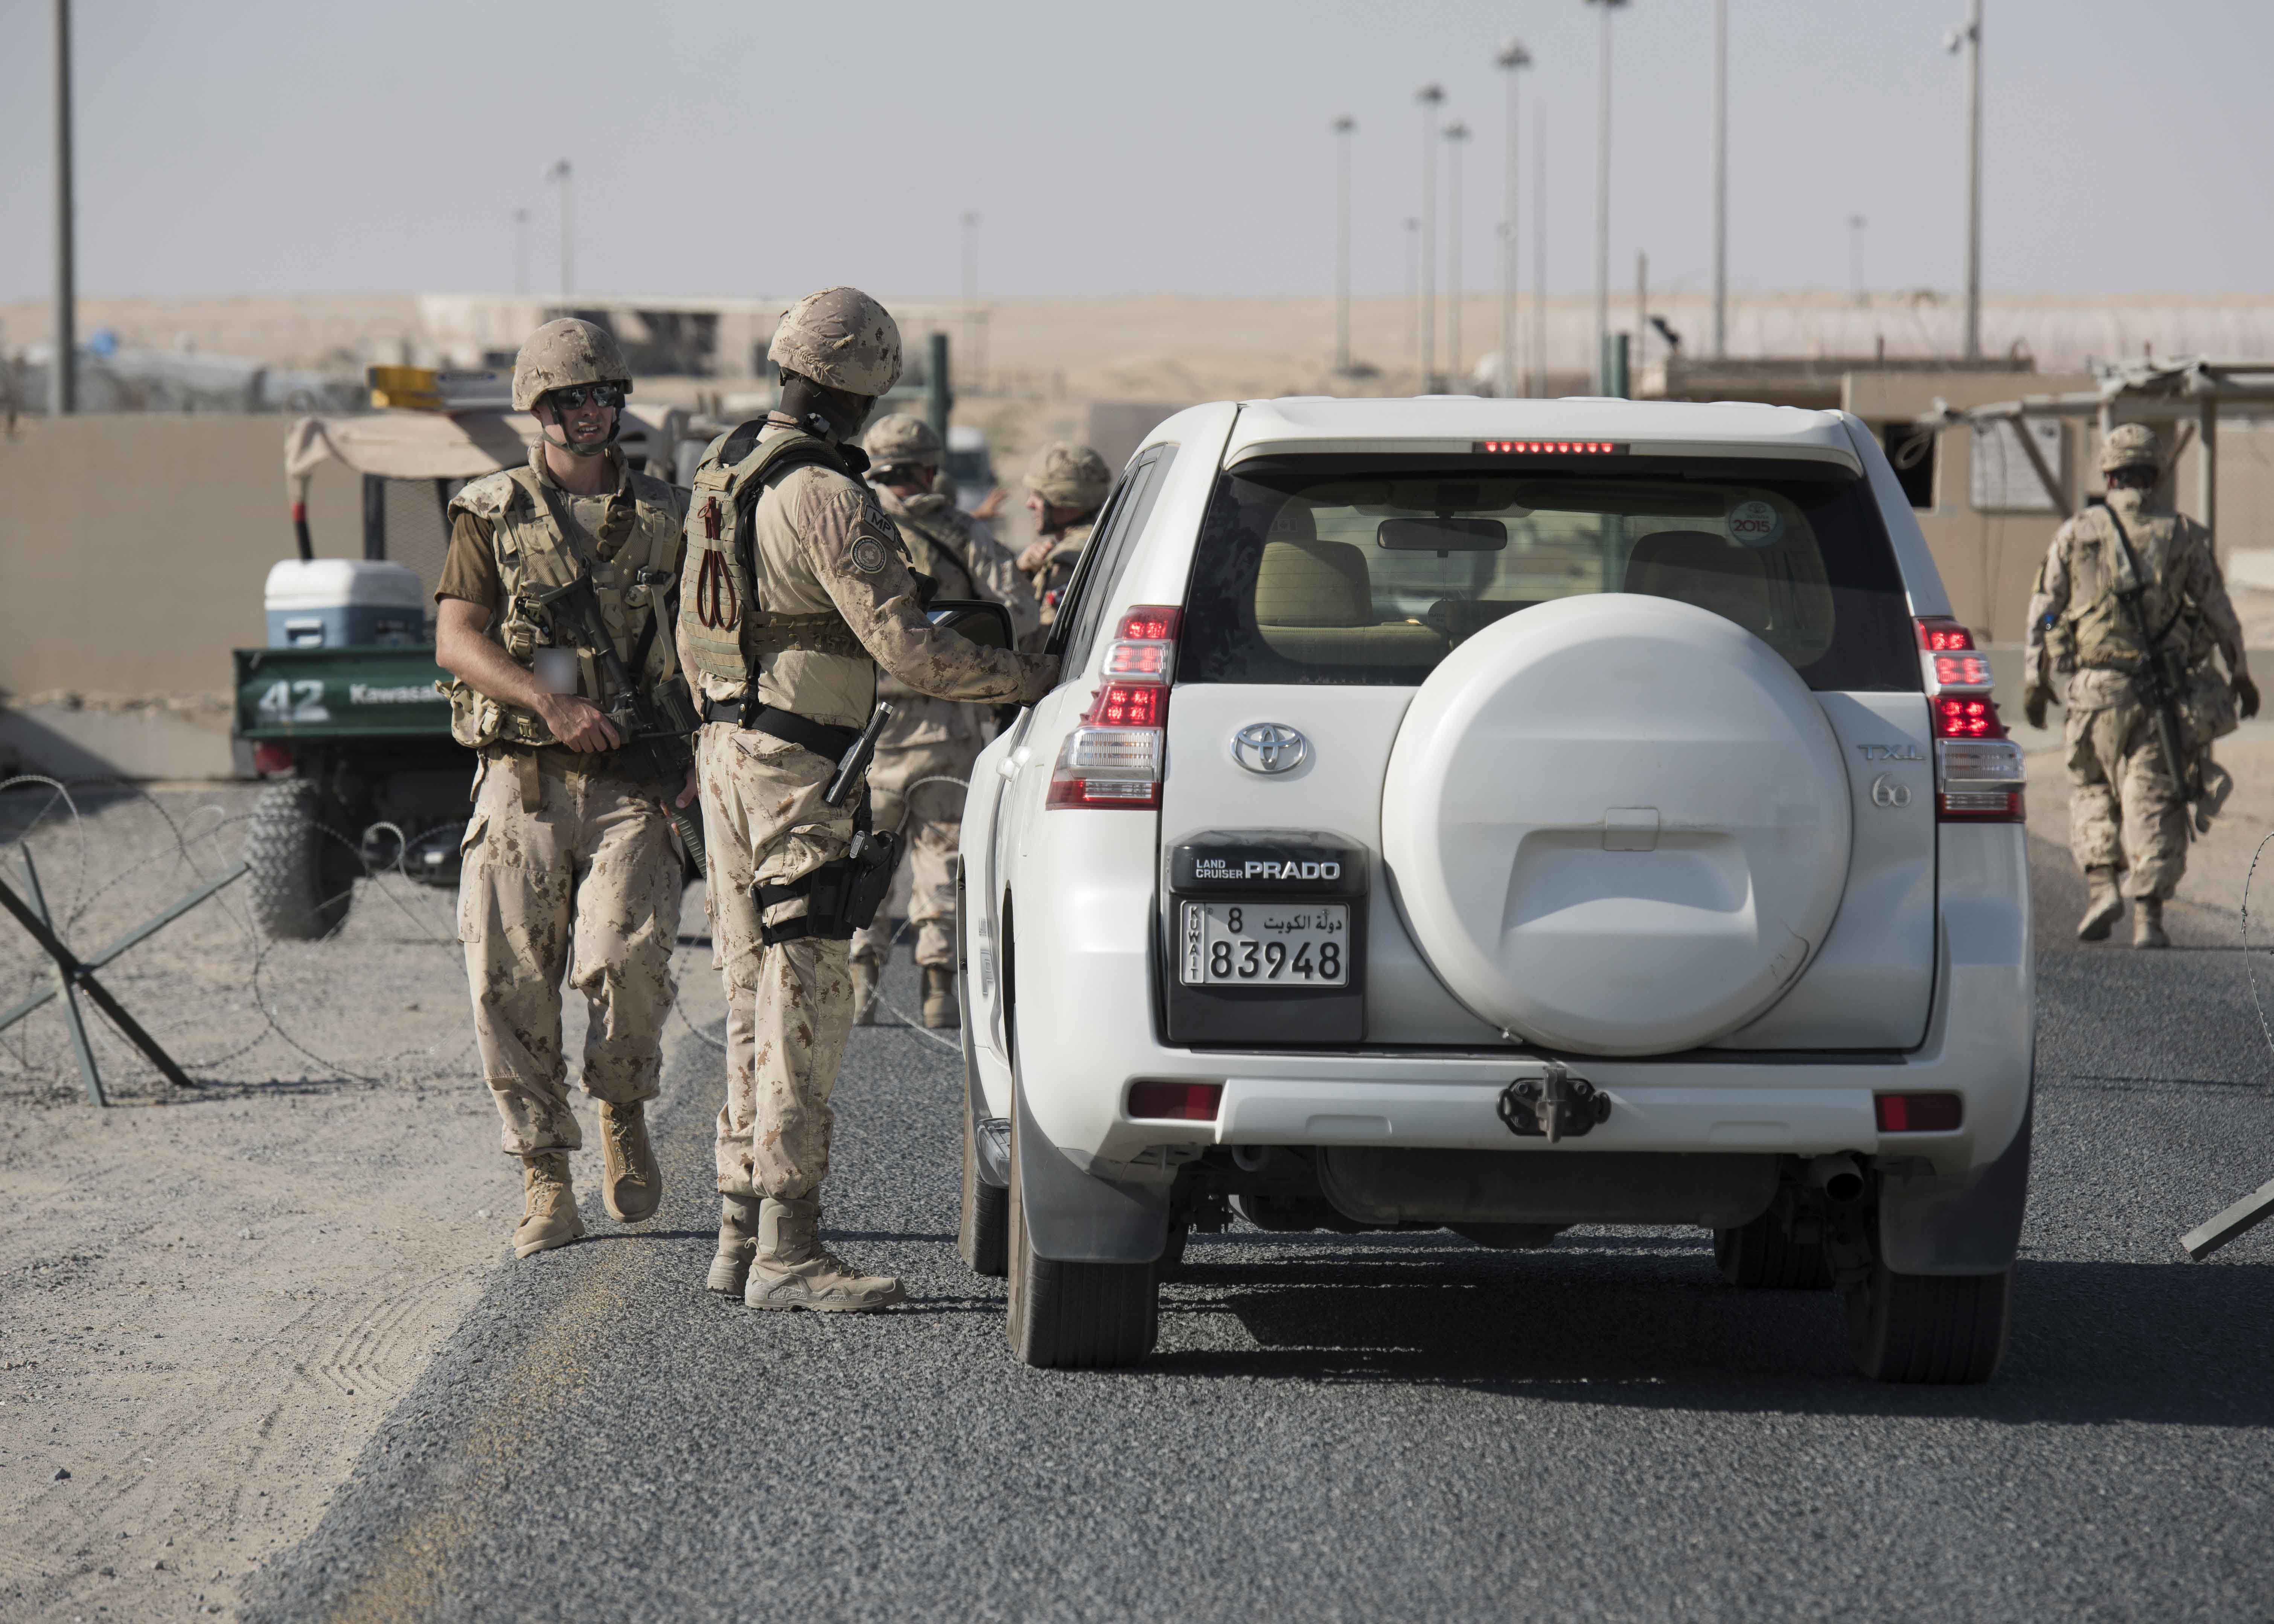 A Canadian Armed Forces Military Police member checks identification at a vehicle checkpoint during an active shooter lockdown scenario exercise conducted at Camp Canada, Kuwait, 29 September 2018. Image by:  Op IMPACT Imaging